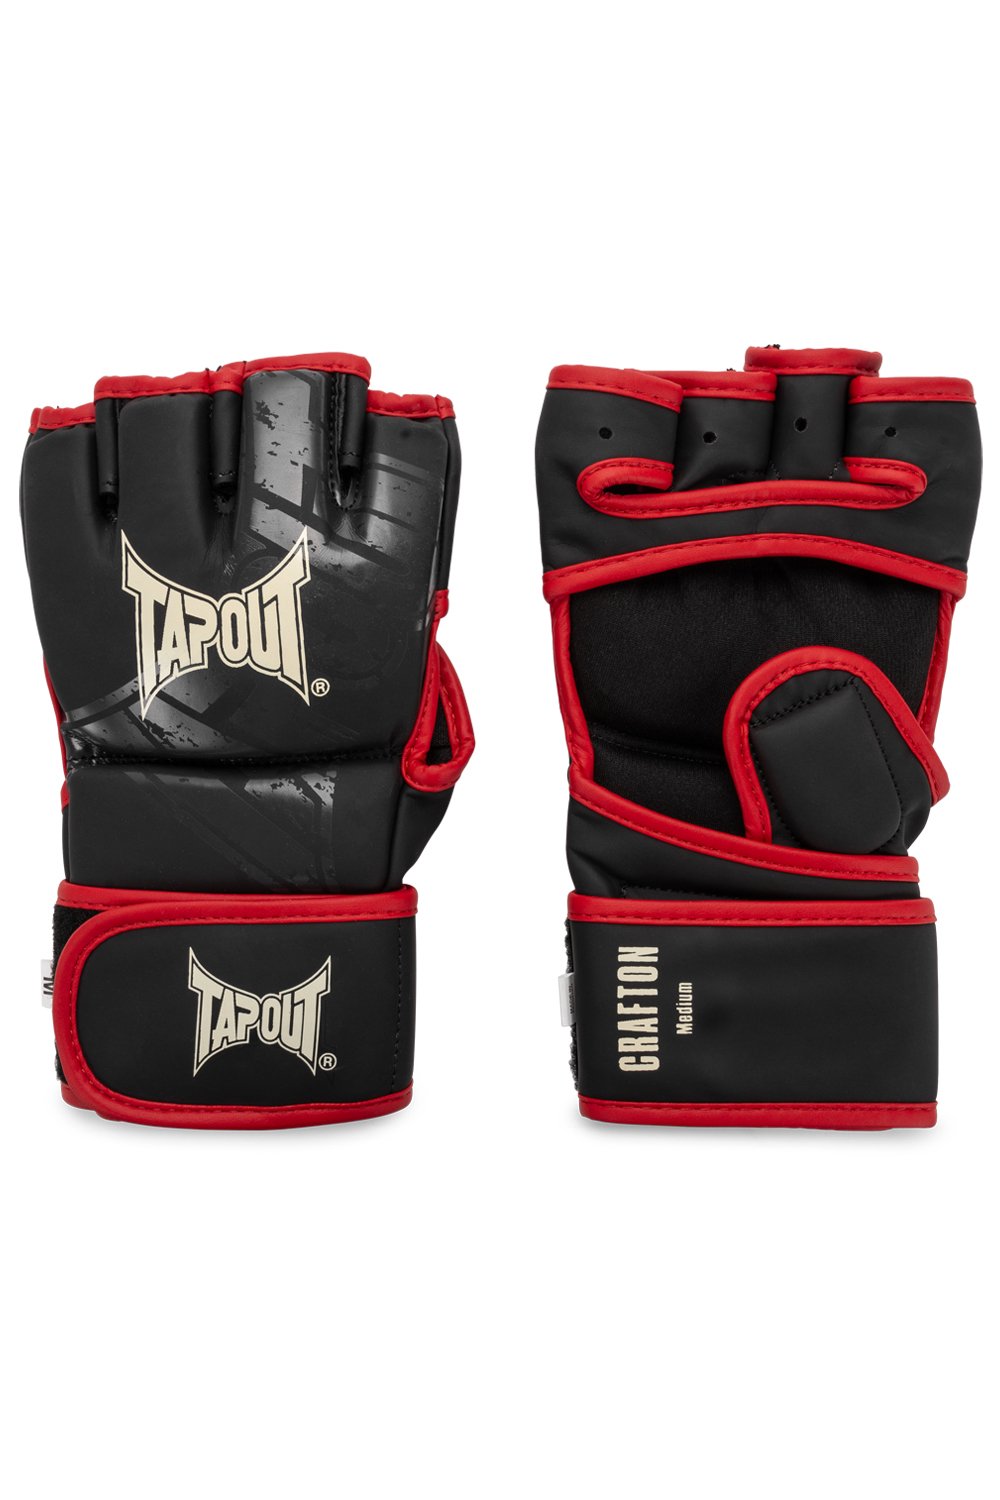 Tapout Artificial Leather MMA Sparring Gloves (1 Pair)